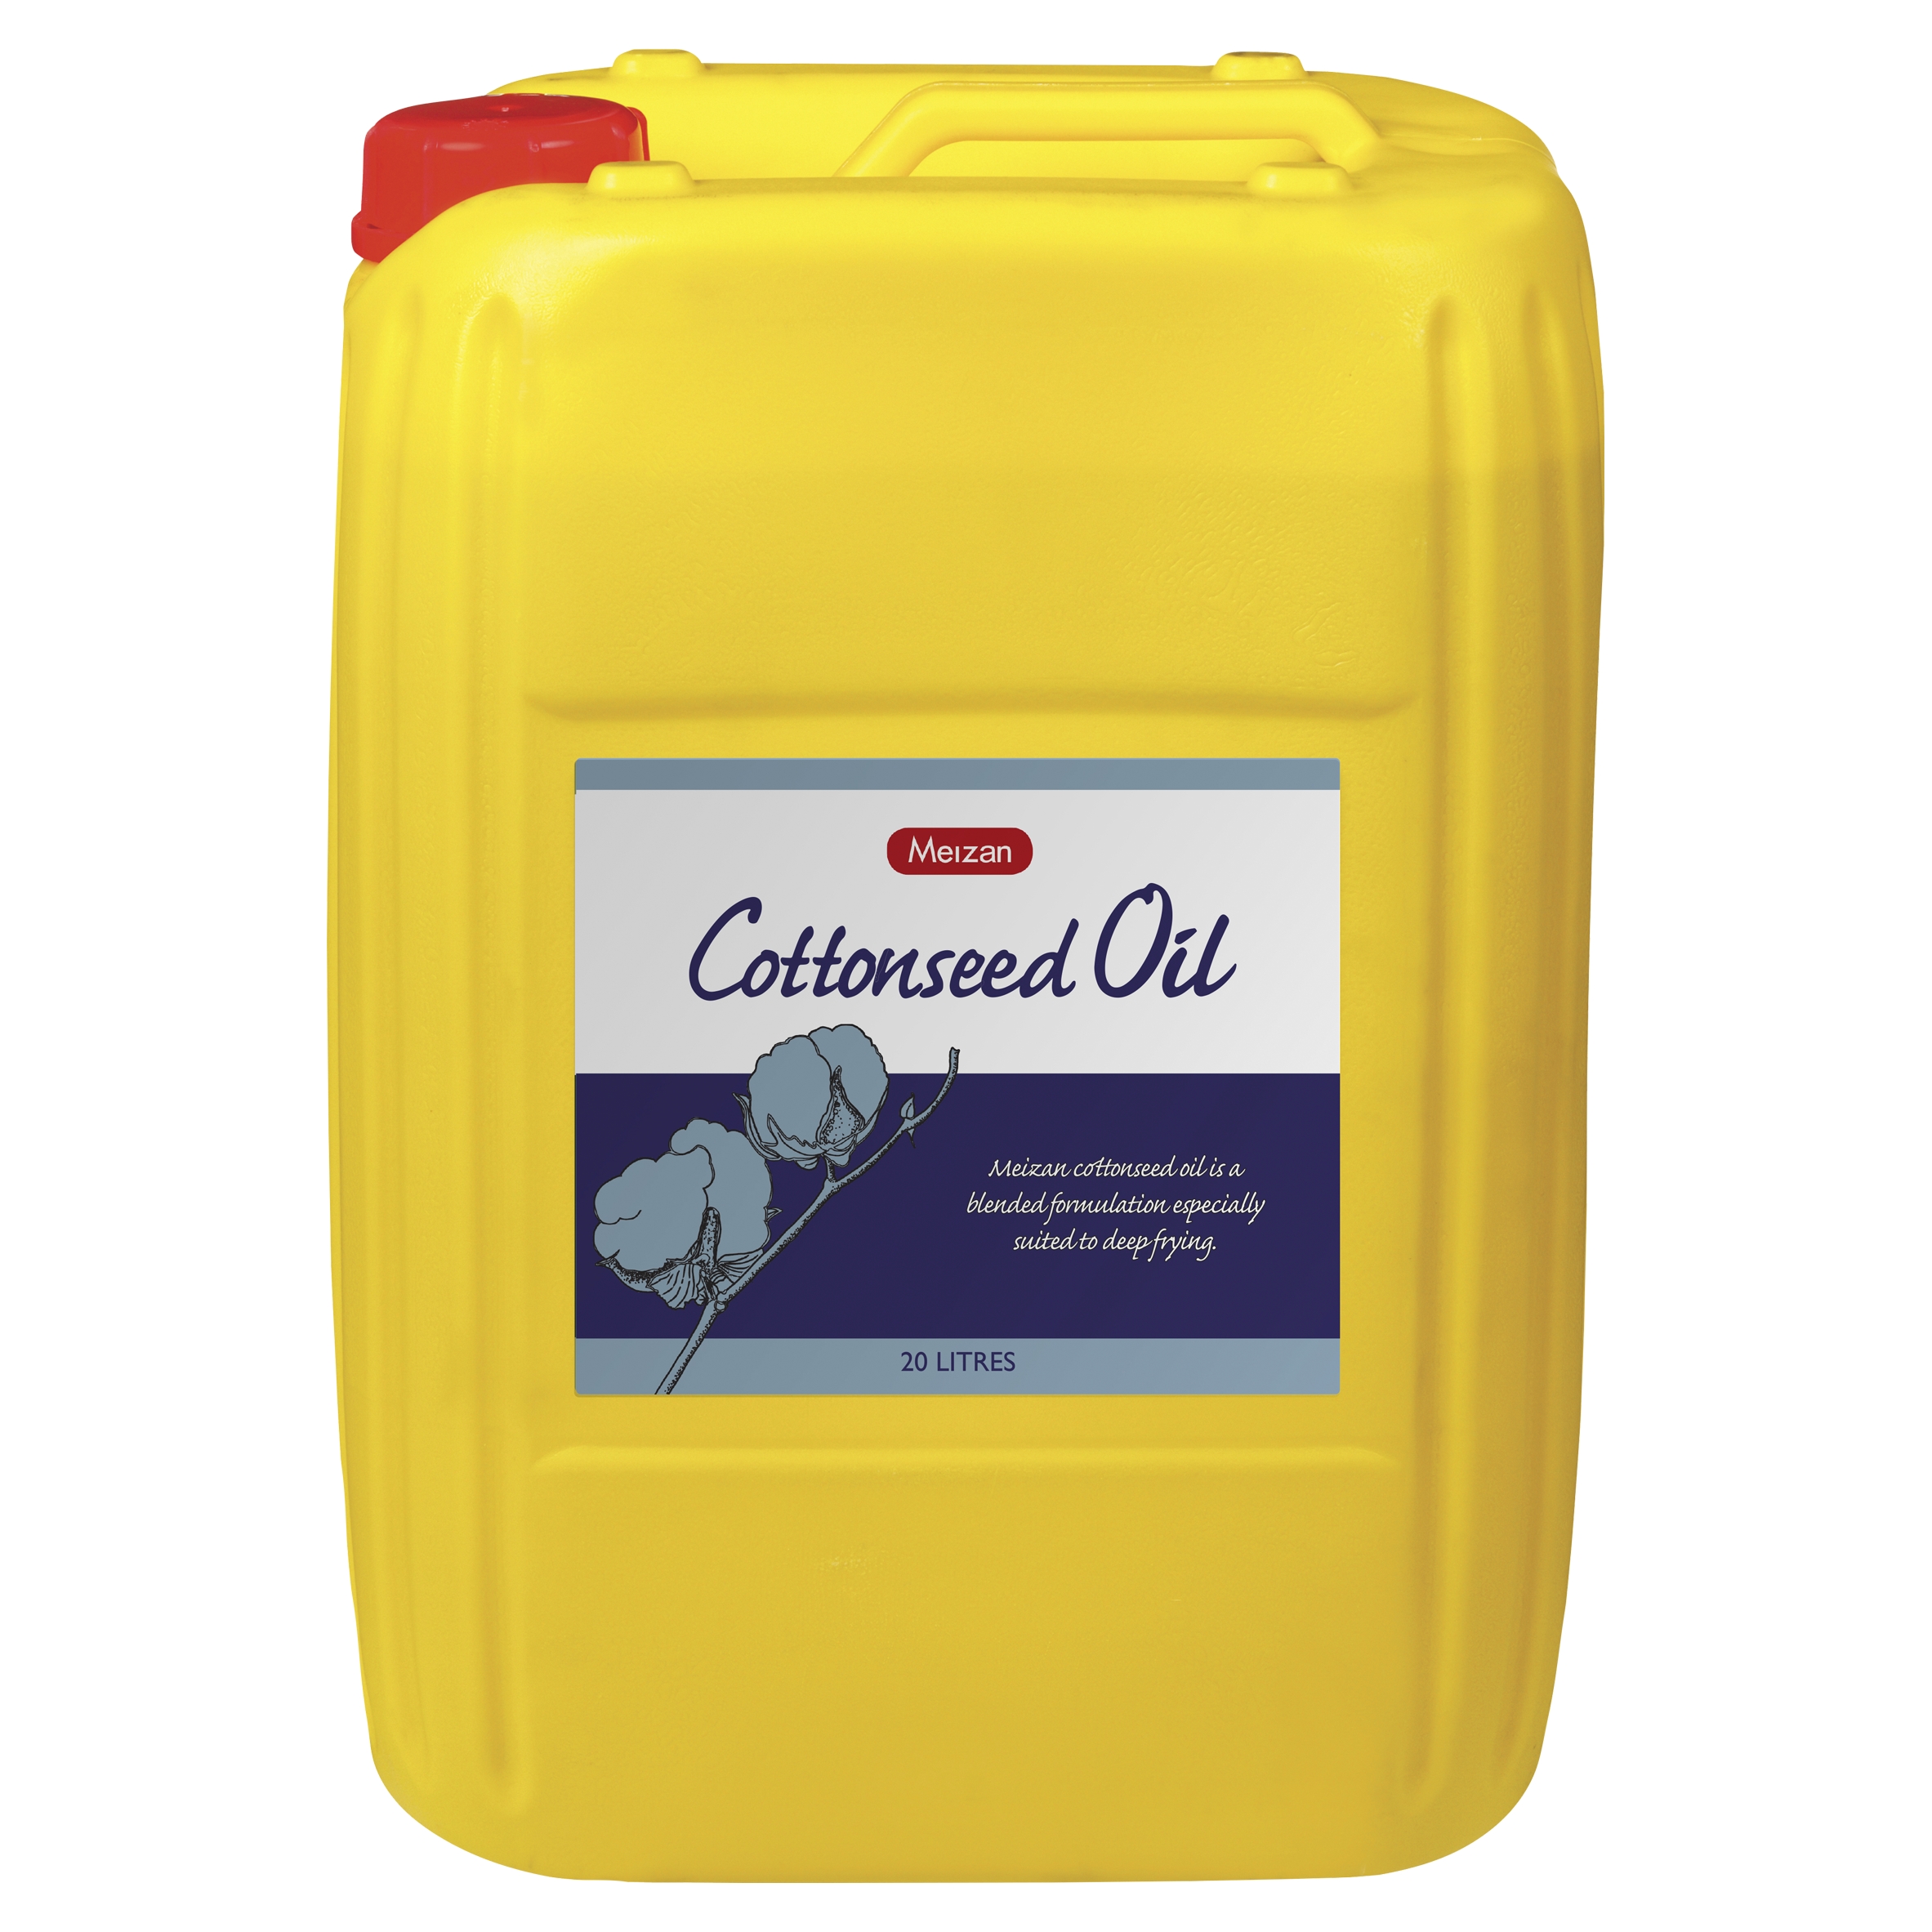 Meizan Cottonseed Oil 20 Litres product photo